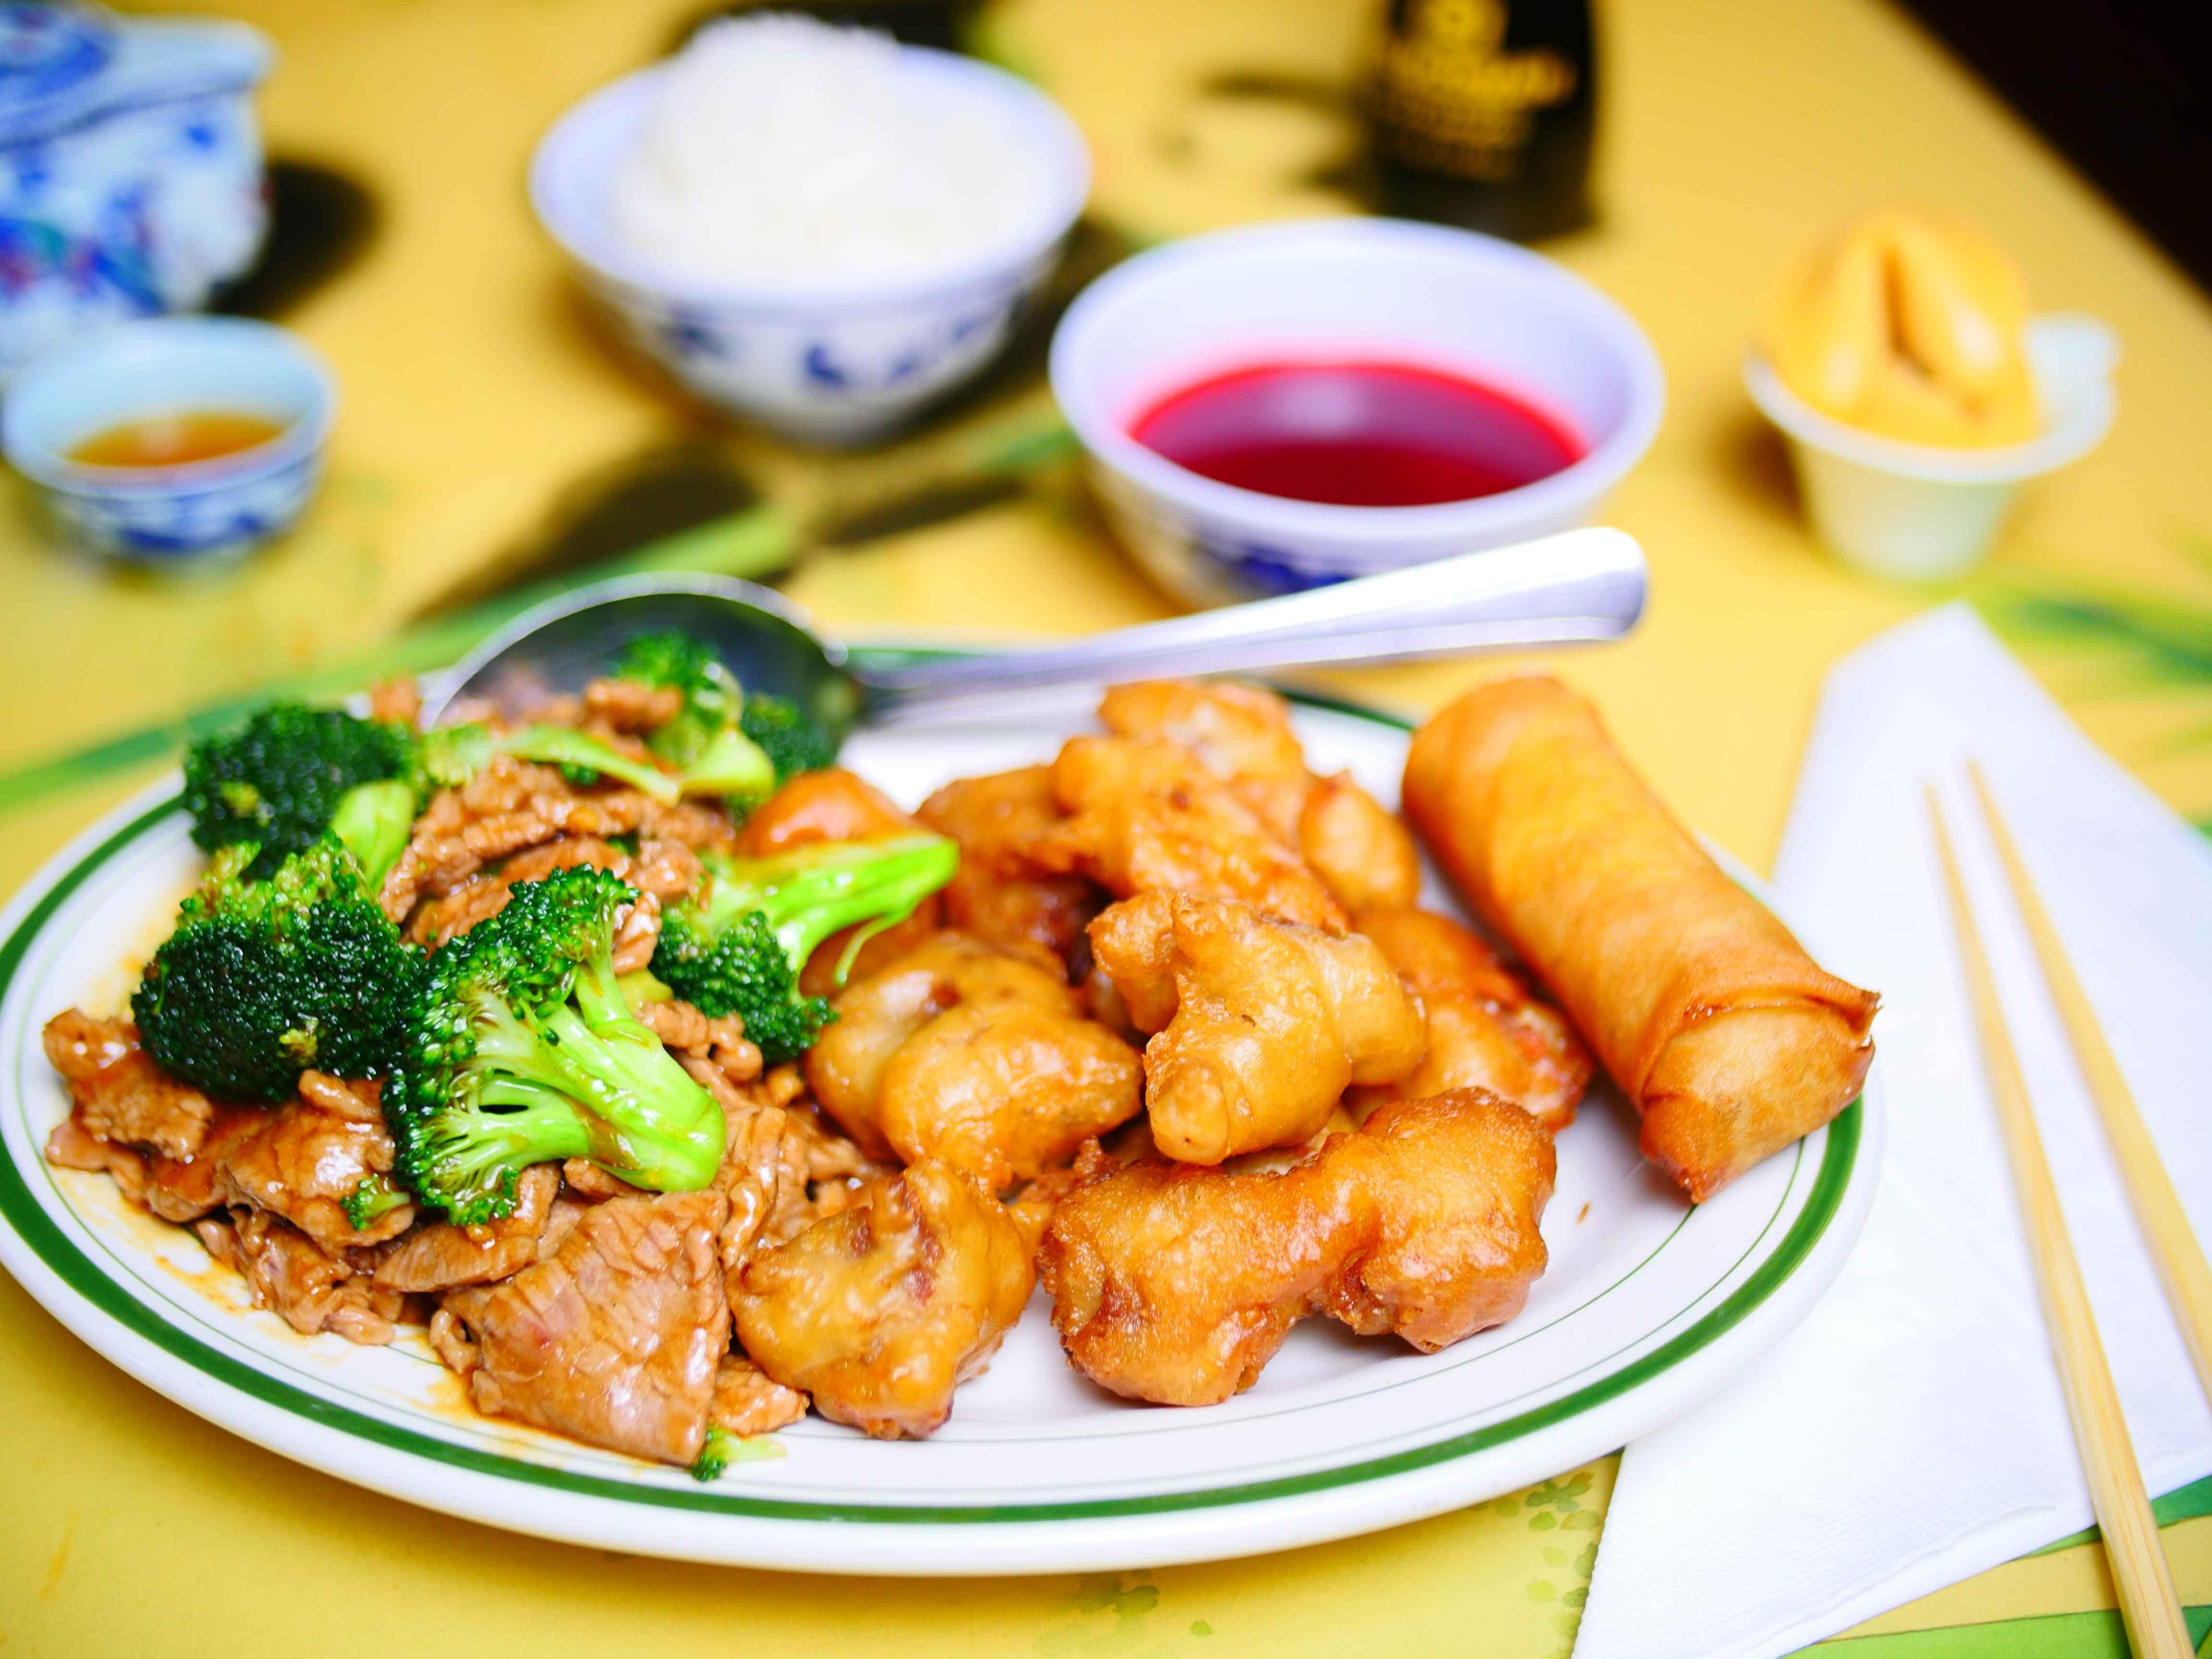 CS6 Beef and Broccoli & Sweet and Sour Pork